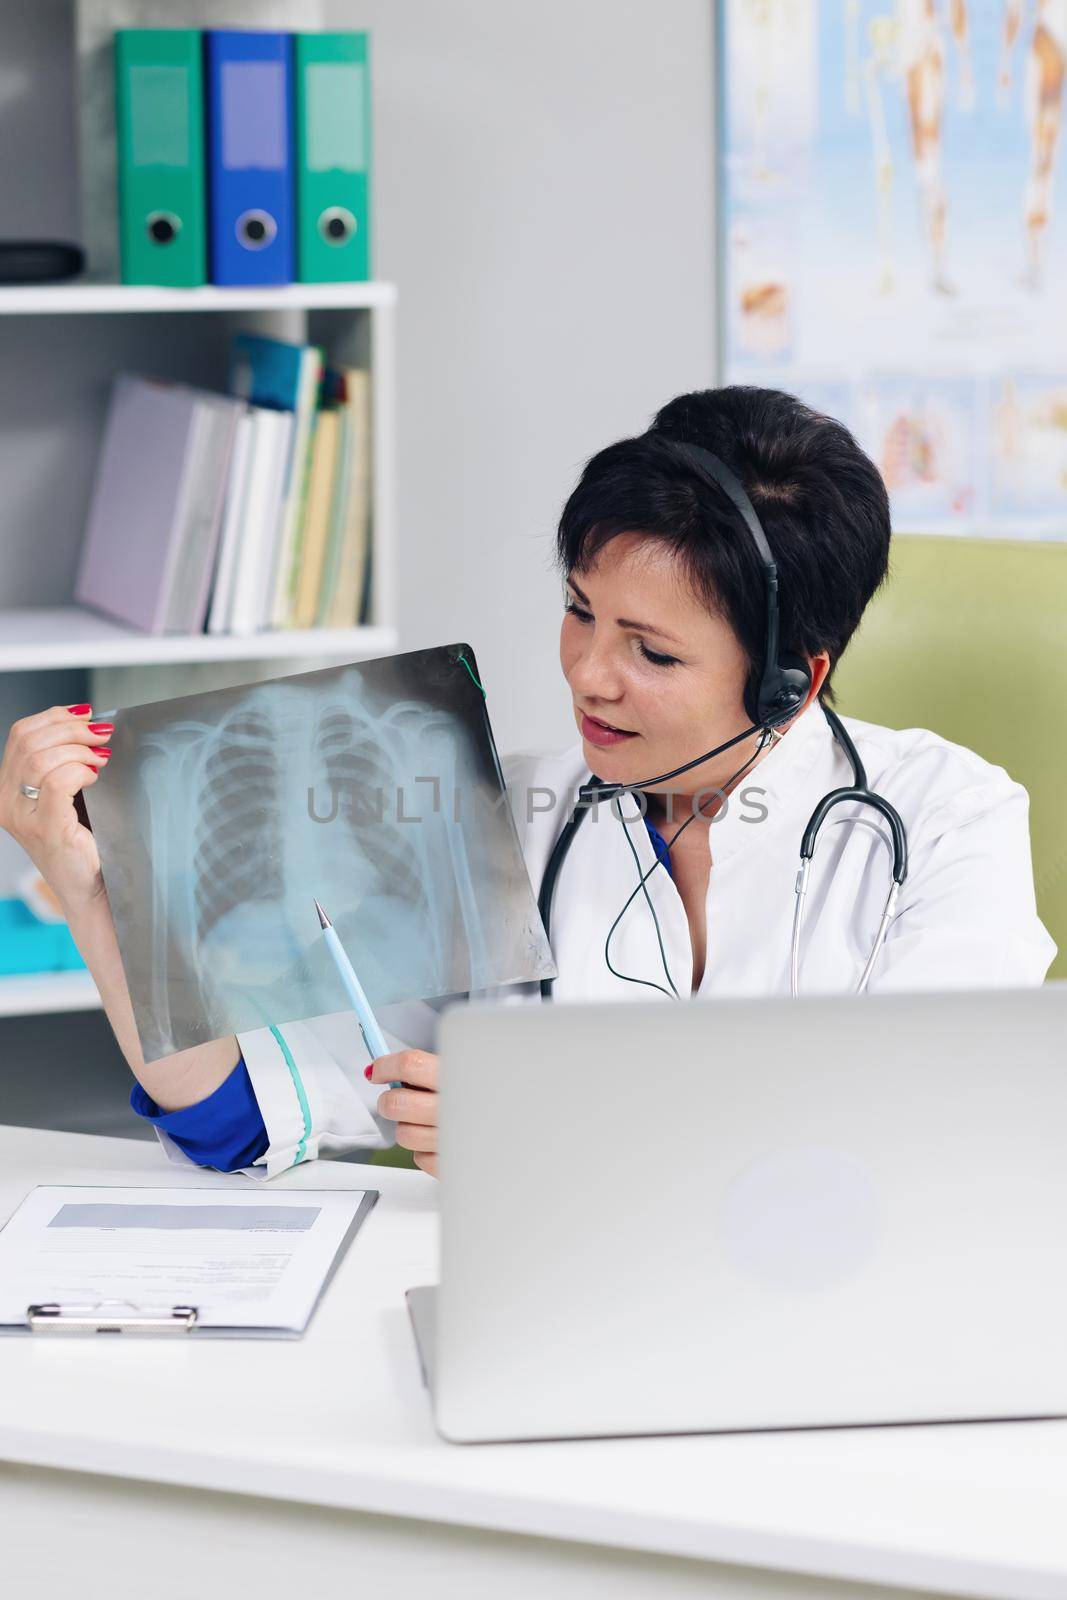 Female medical doctor wears white coat, headset video calling distant patient on laptop. Doctor talking to client using virtual chat computer app. Telemedicine, remote healthcare services concept by uflypro